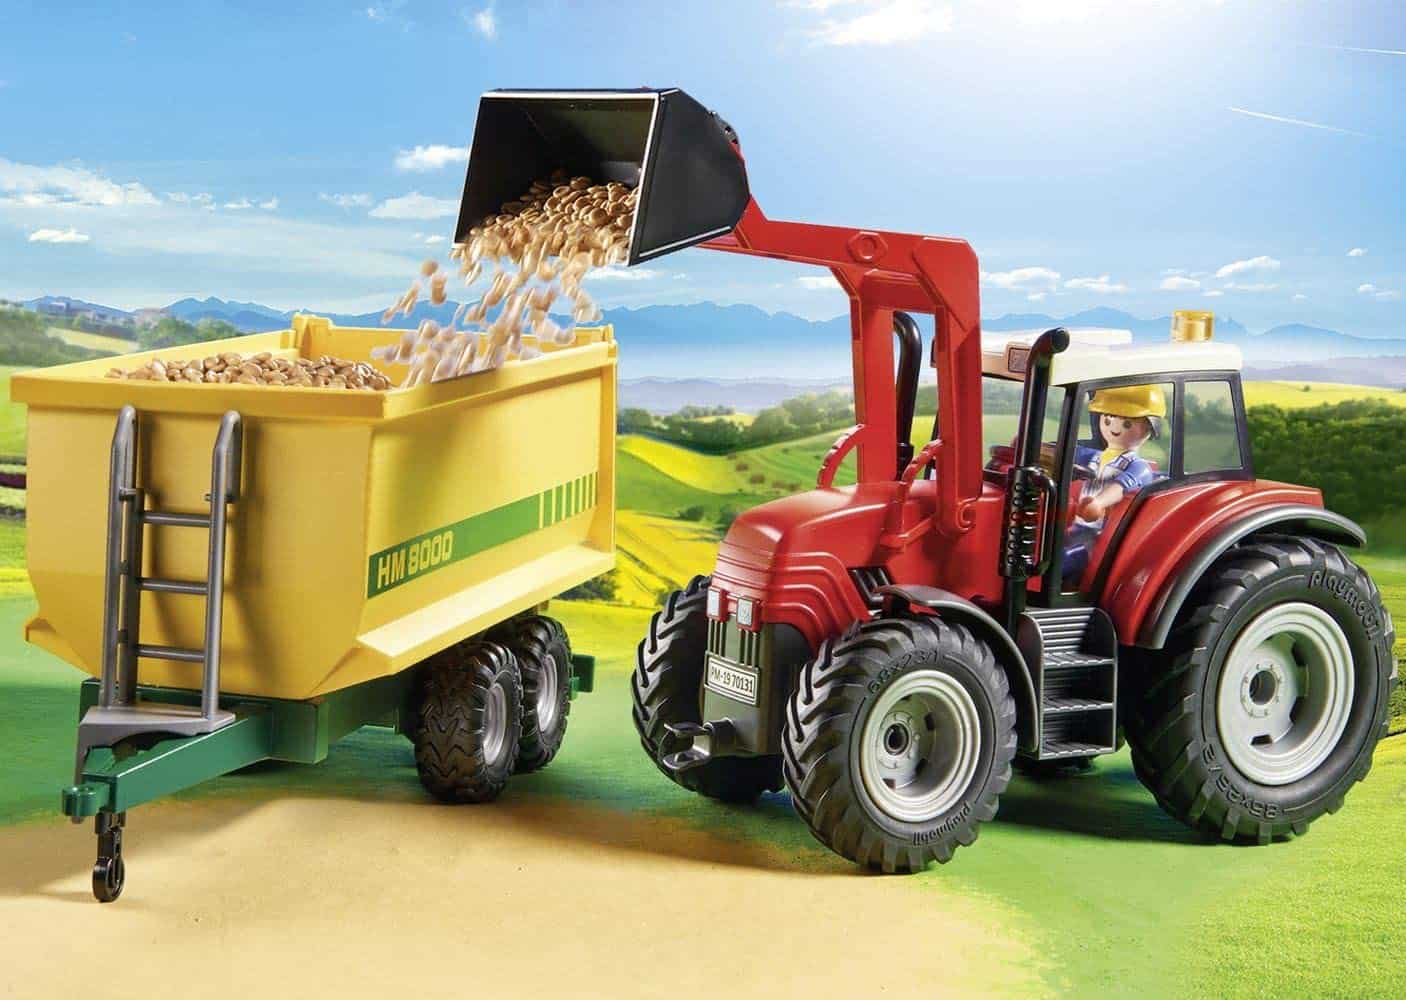 Best toy indoor tractor: Playmobil Country Tractor with trailer 70131